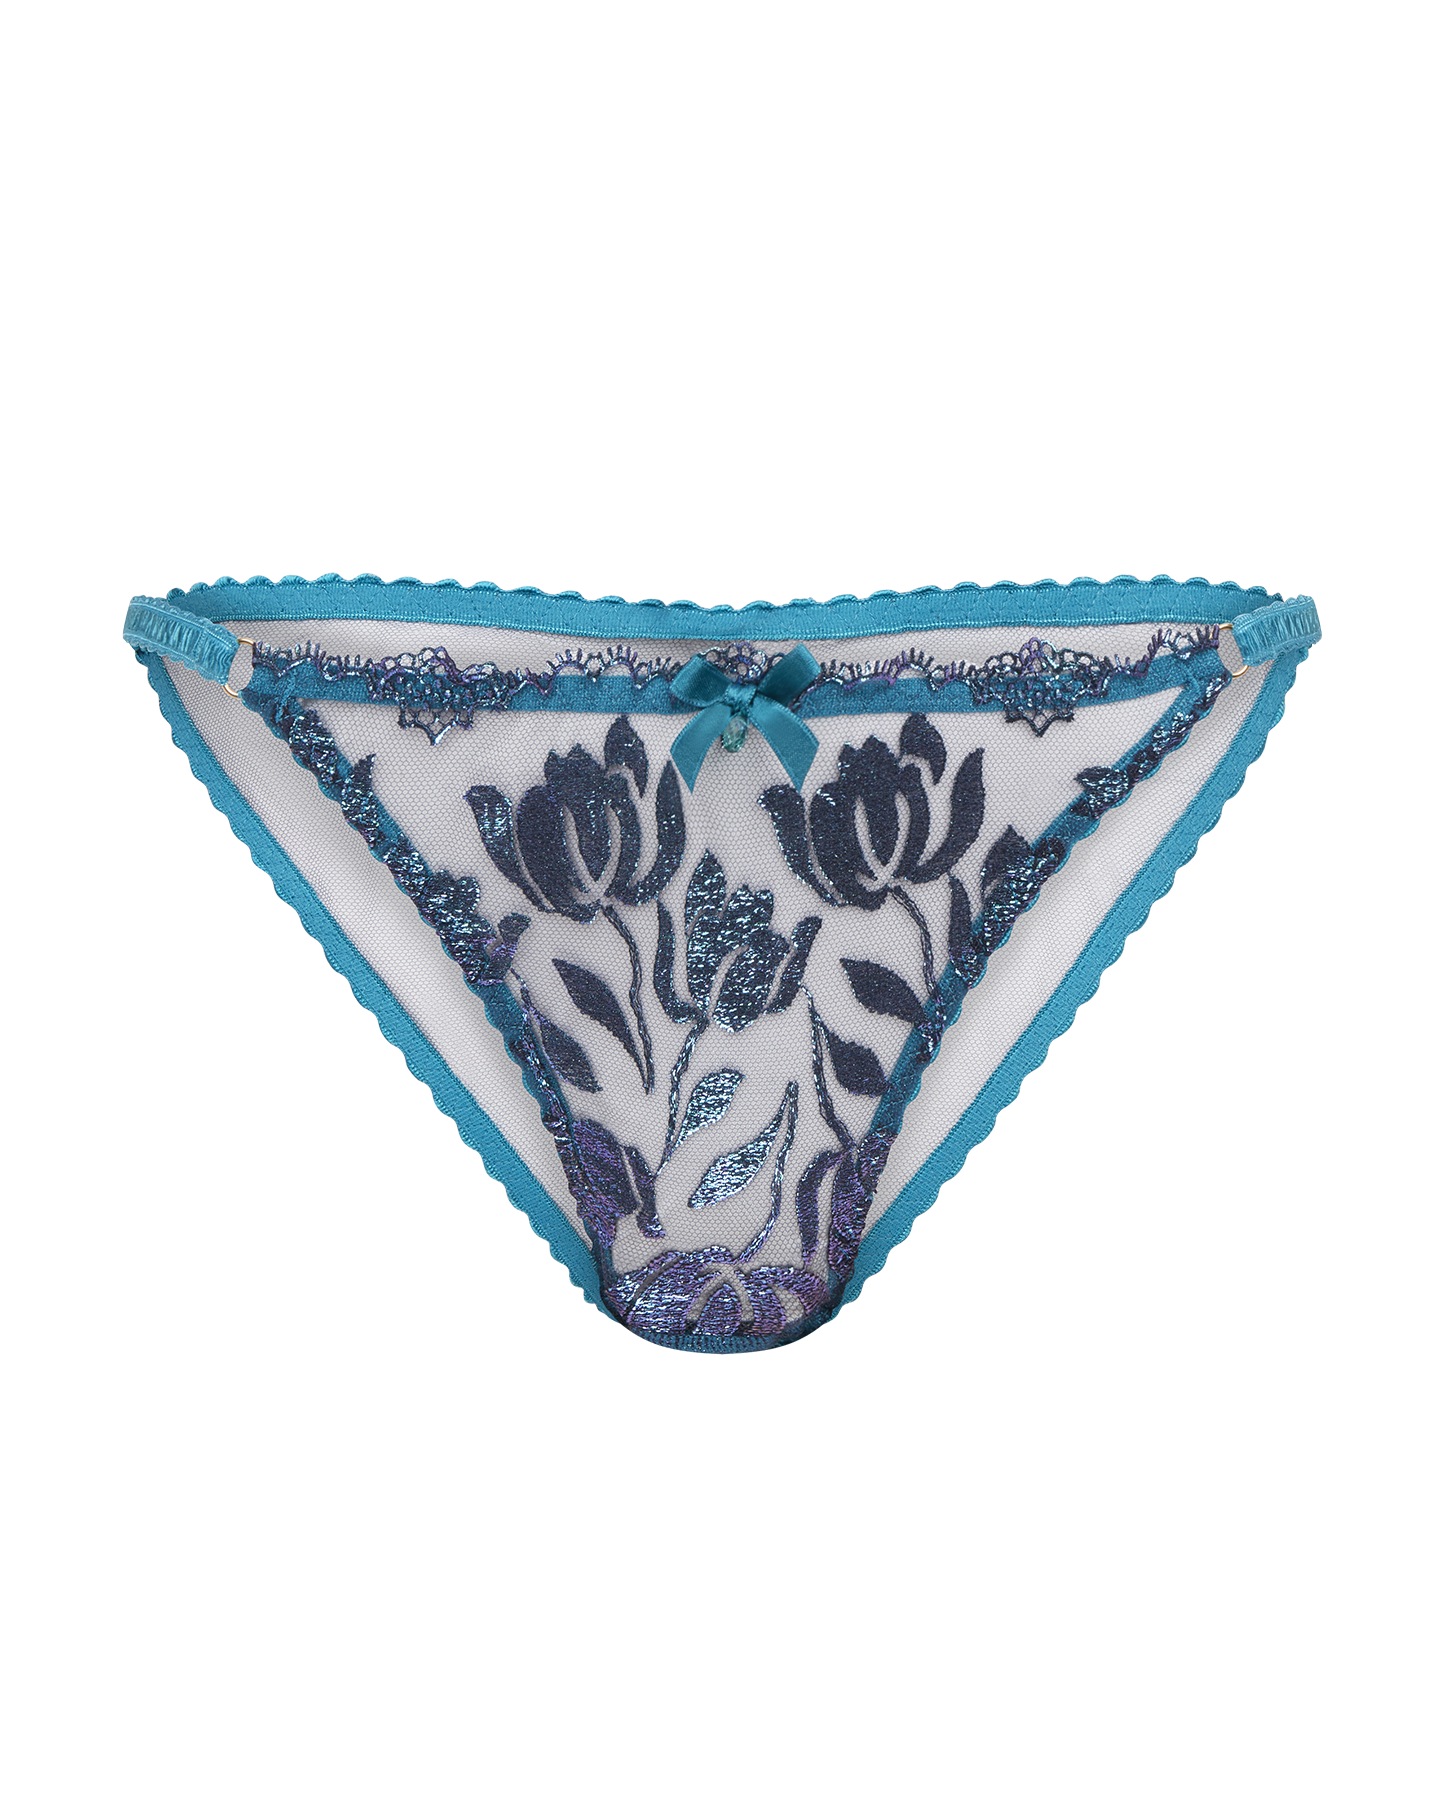 Sparkle Full Brief in Teal/Navy